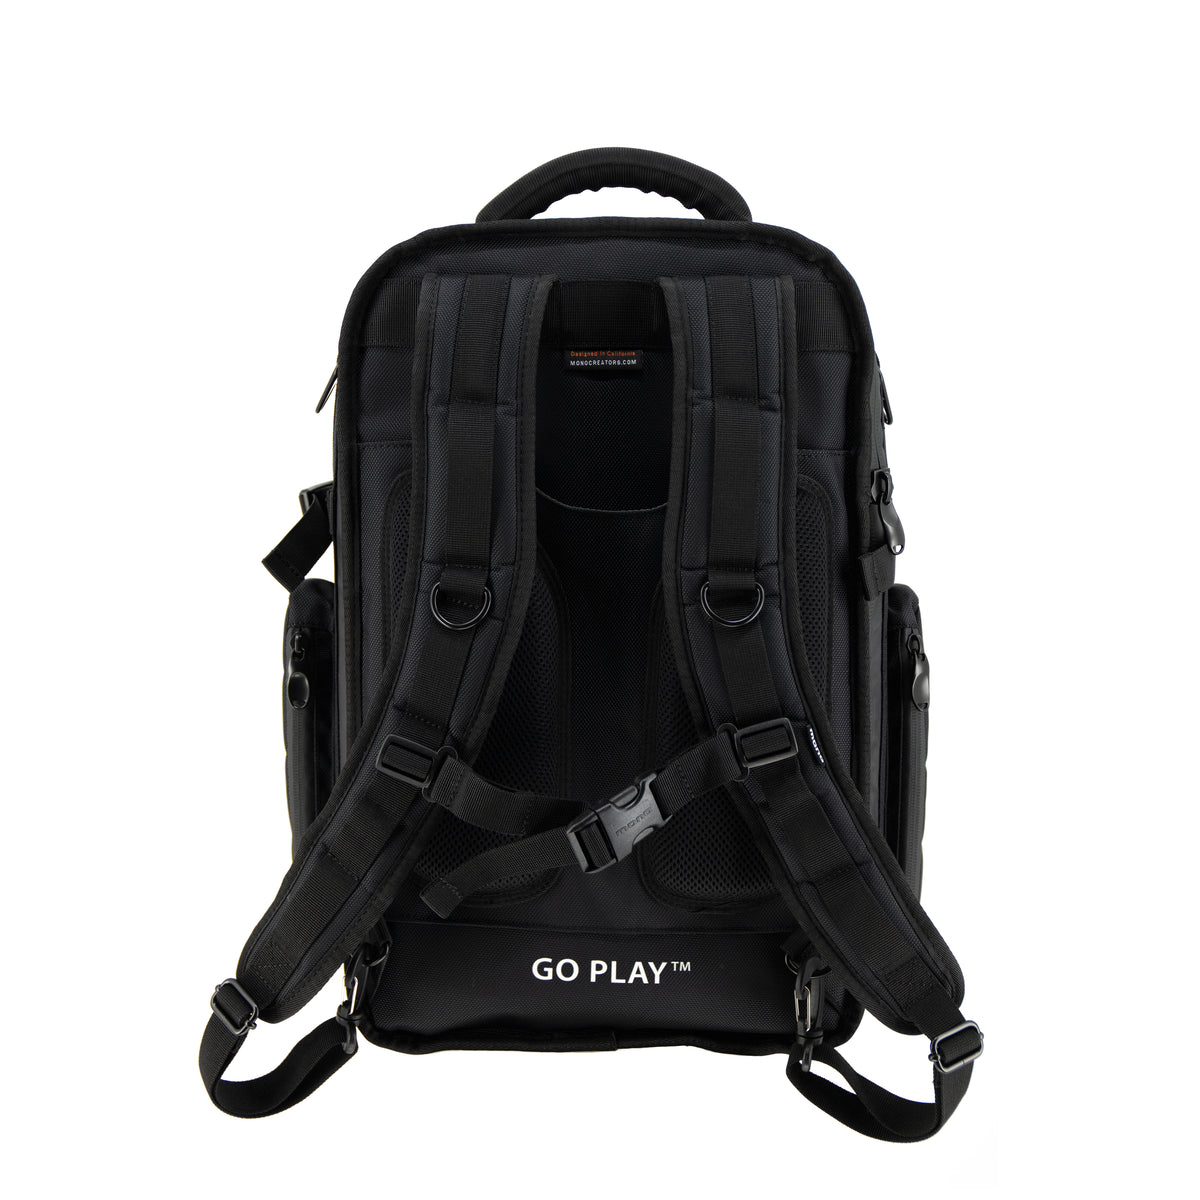 Classic FlyBy Ultra Backpack, Black – MONO